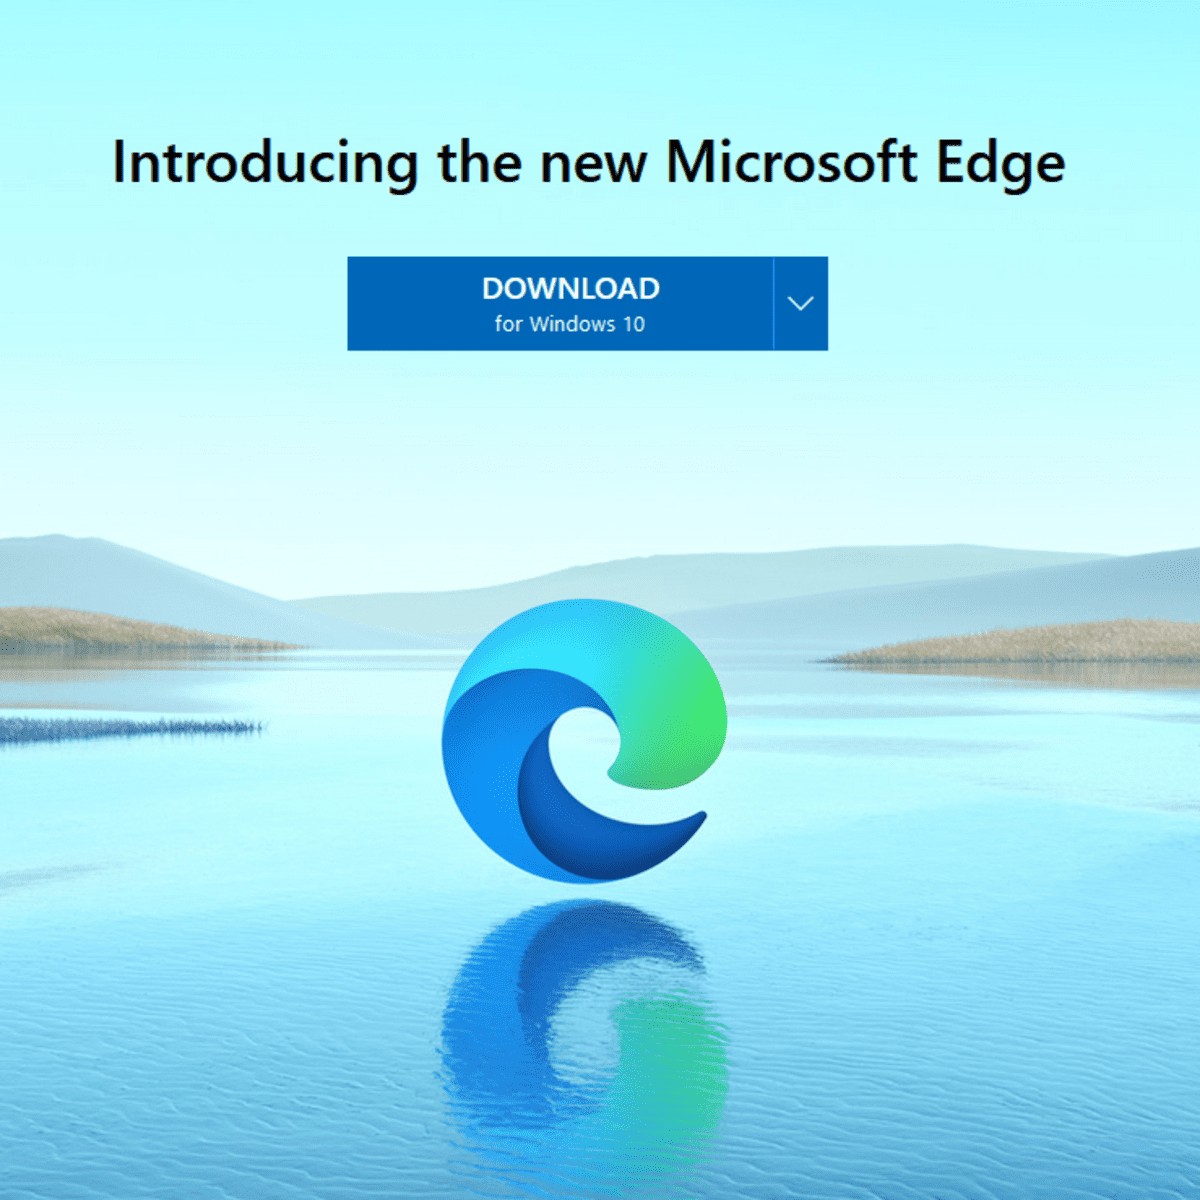 How to Install Chrome Extensions On Microsoft Edge?